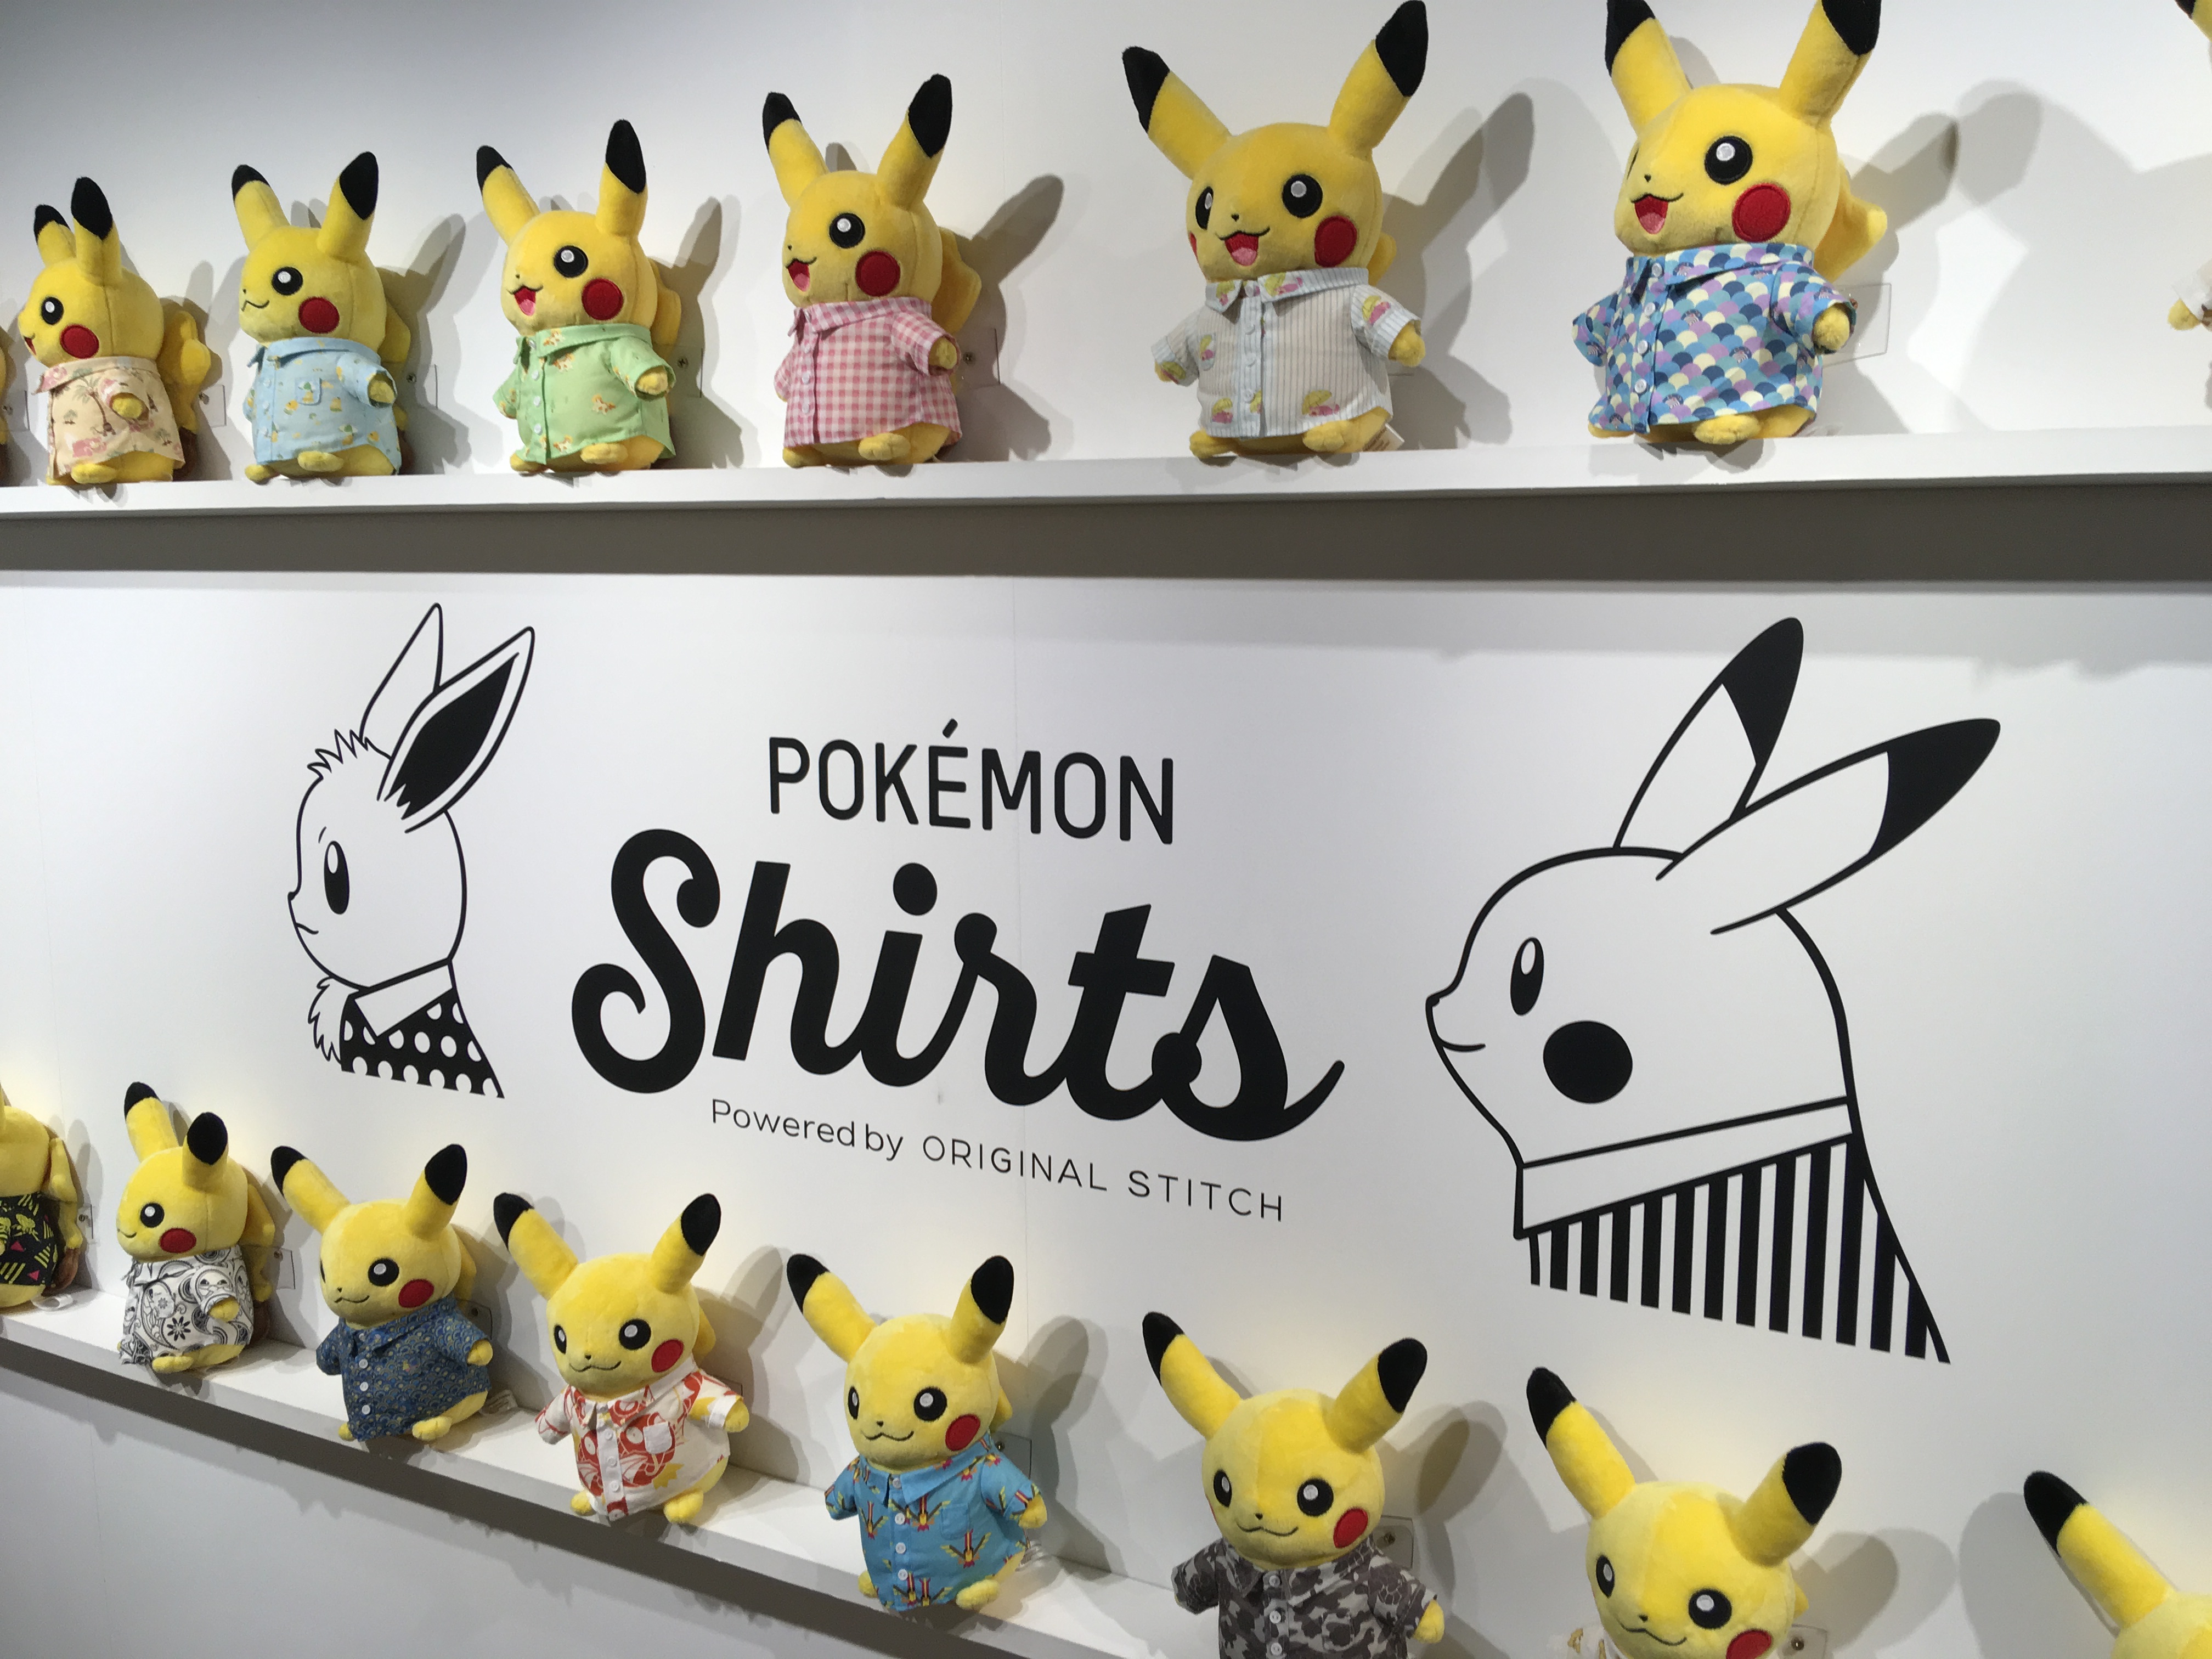 Where To Buy Pokemon Go Merch So You Can Catch Pikachu & Squirtle